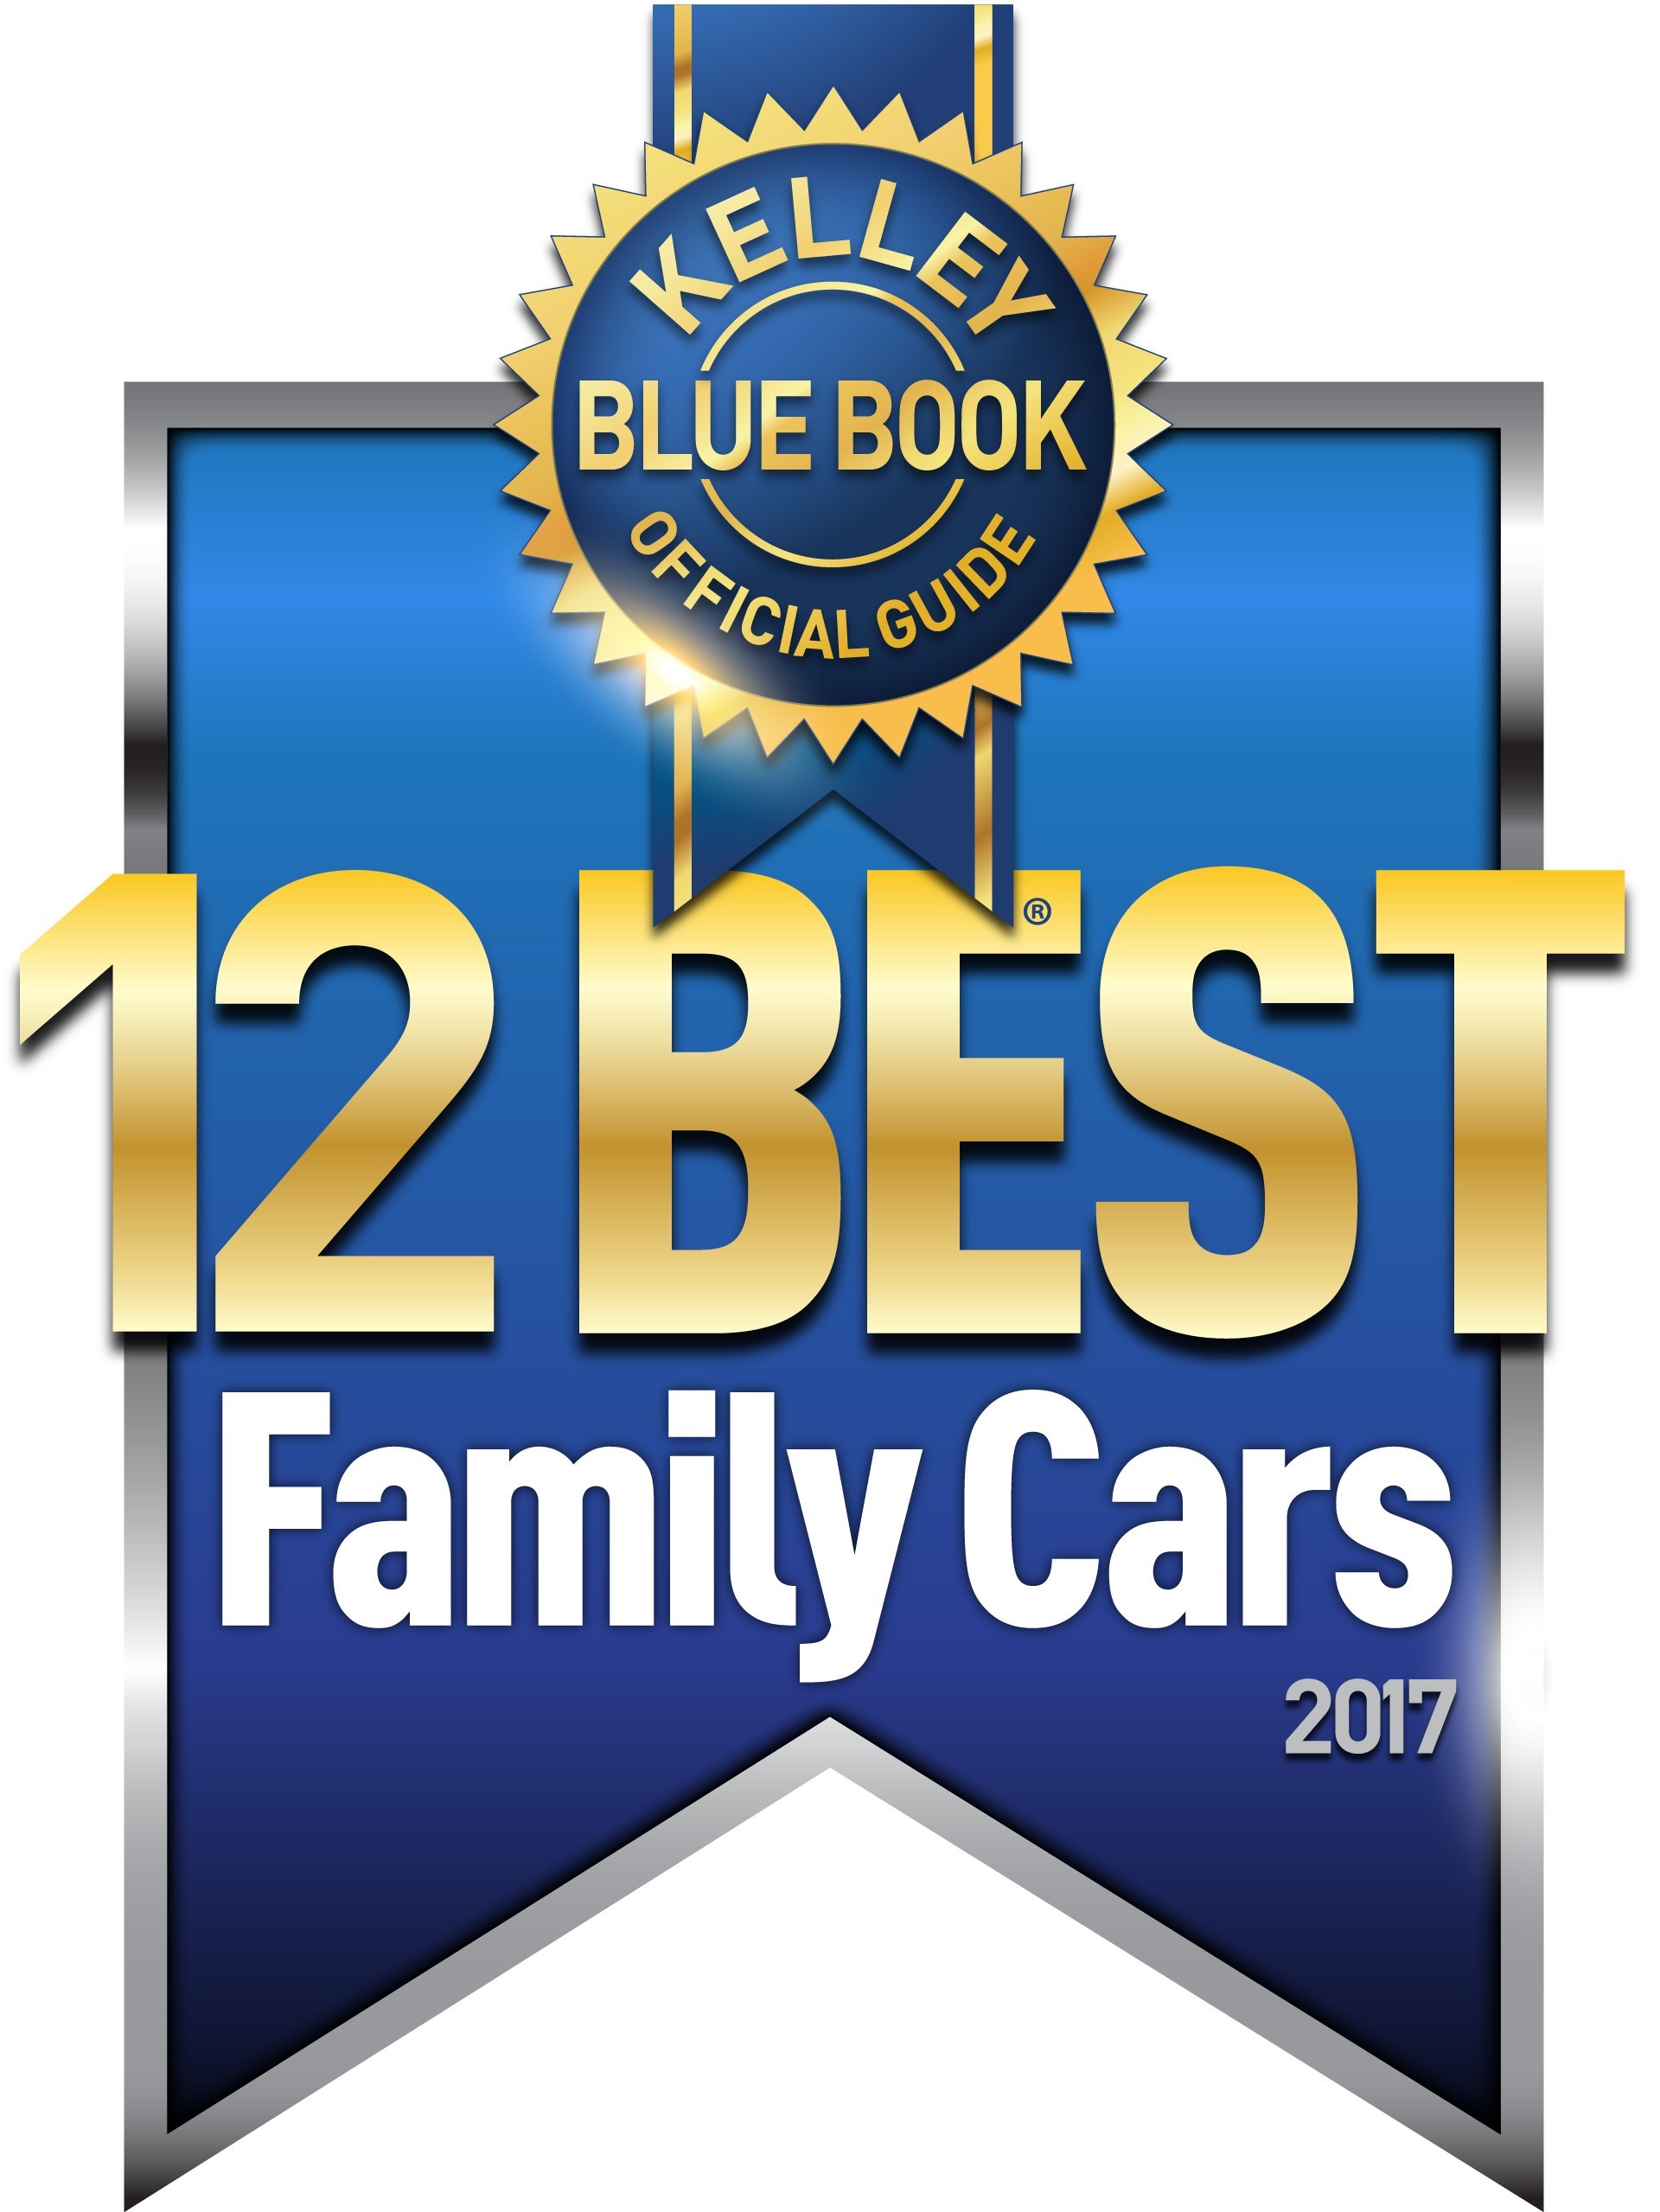 What are some highly ranked family cars?